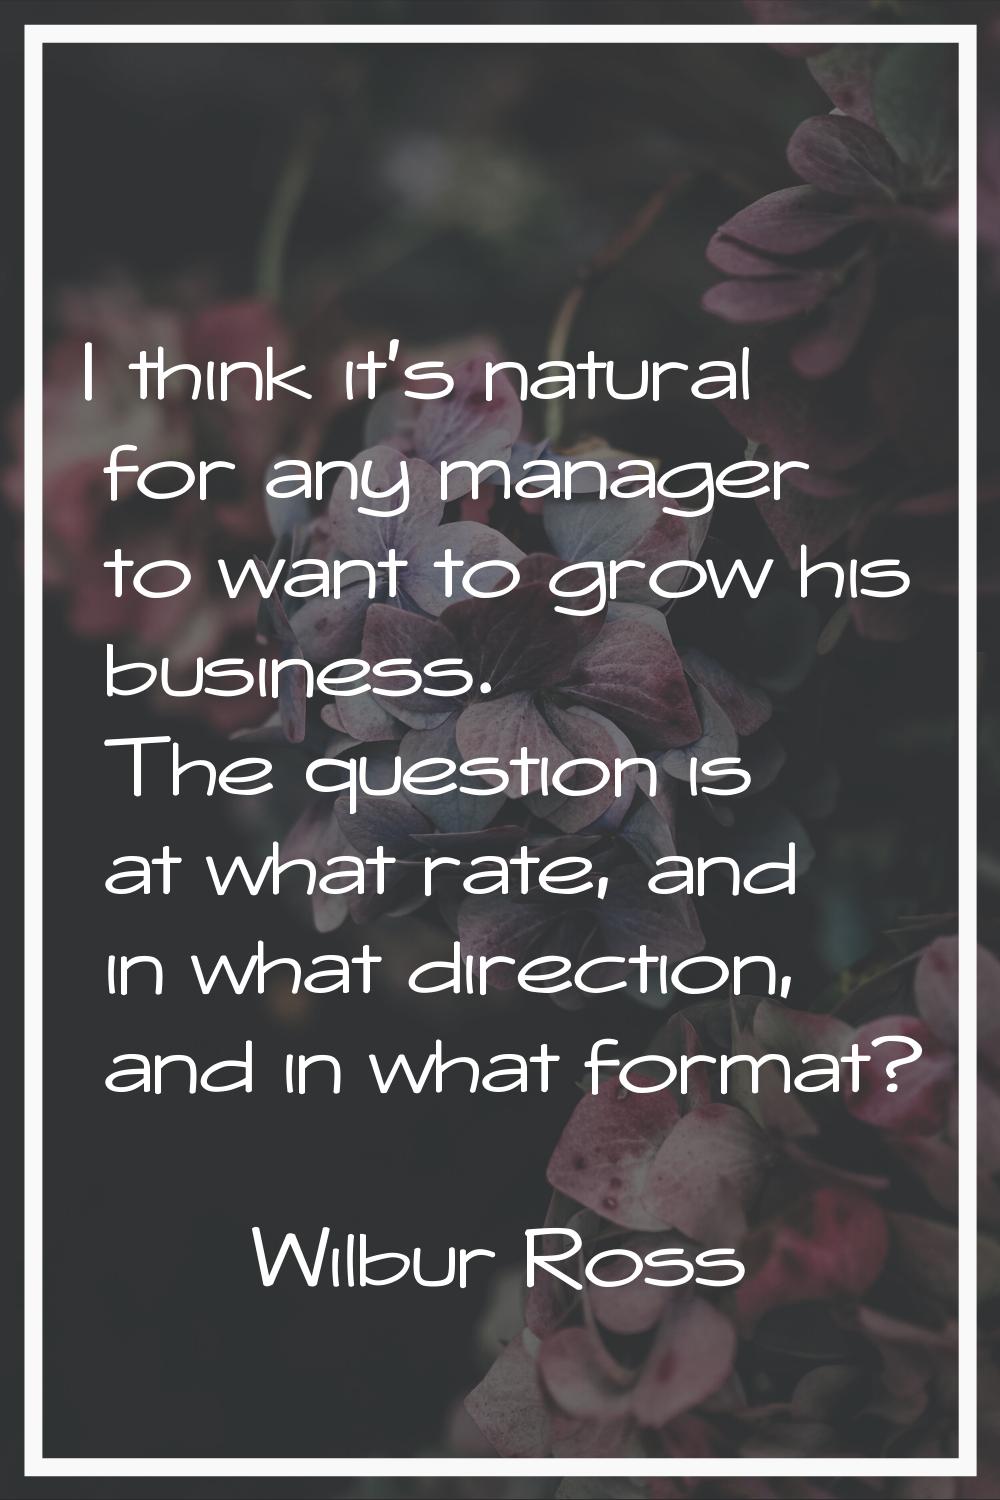 I think it's natural for any manager to want to grow his business. The question is at what rate, an